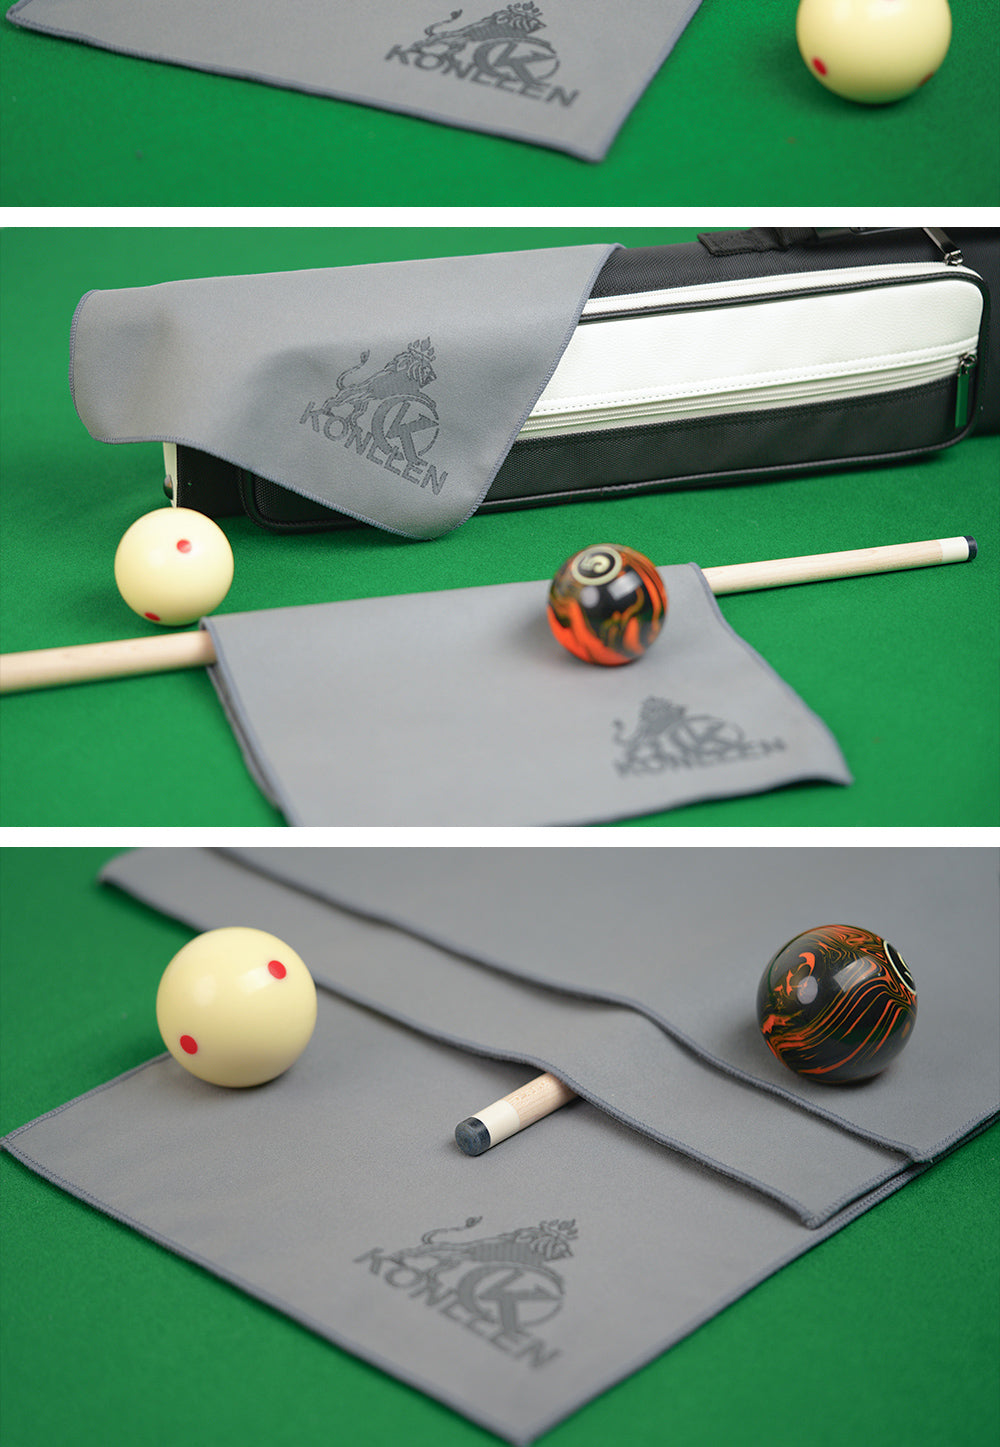 KONLLEN-Pool Cue Cleaning Towel, Multi-Function, Polished Rod, Wiping Cloth, Suede Towel, Billiards Accessories